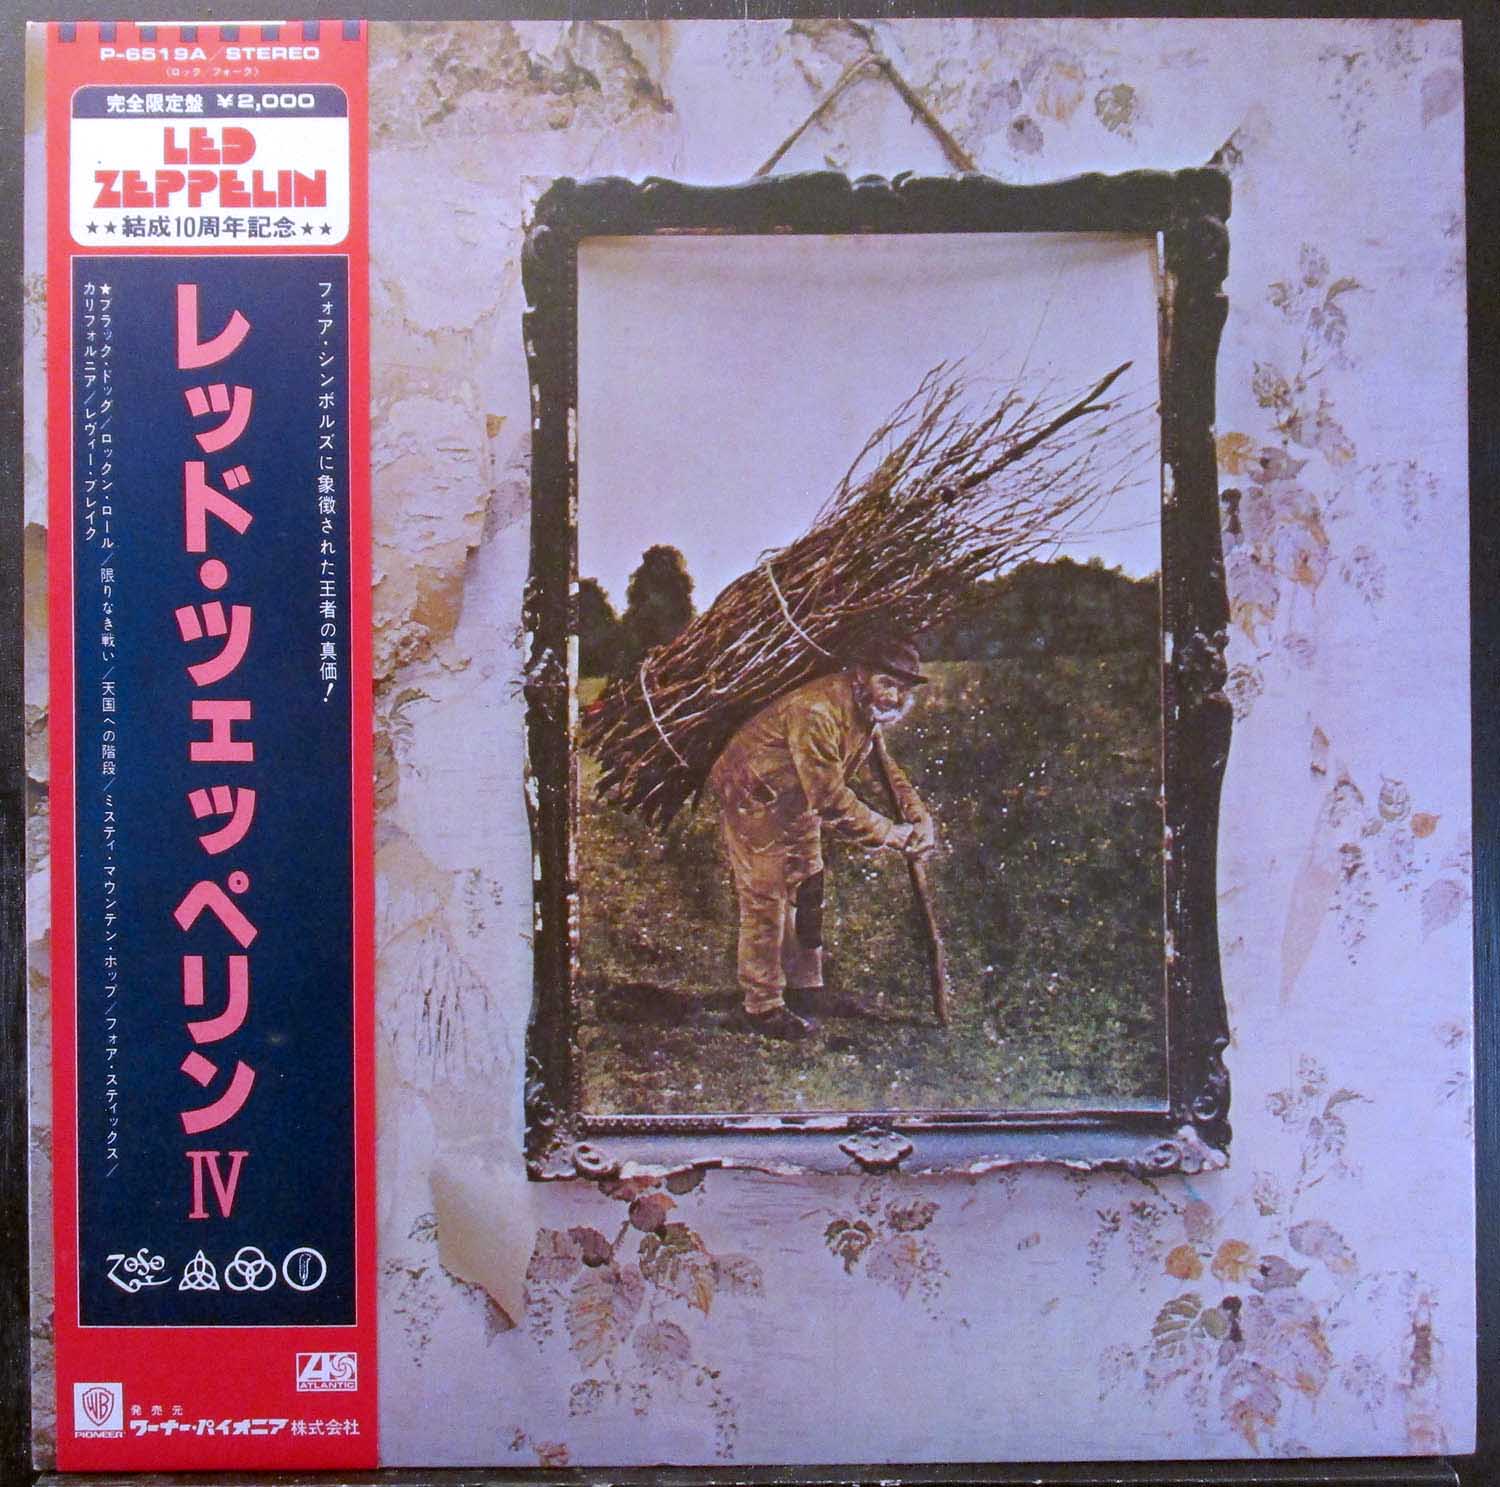 Led Zeppelin - IV 1979 10th Anniversary Japan LP with obi